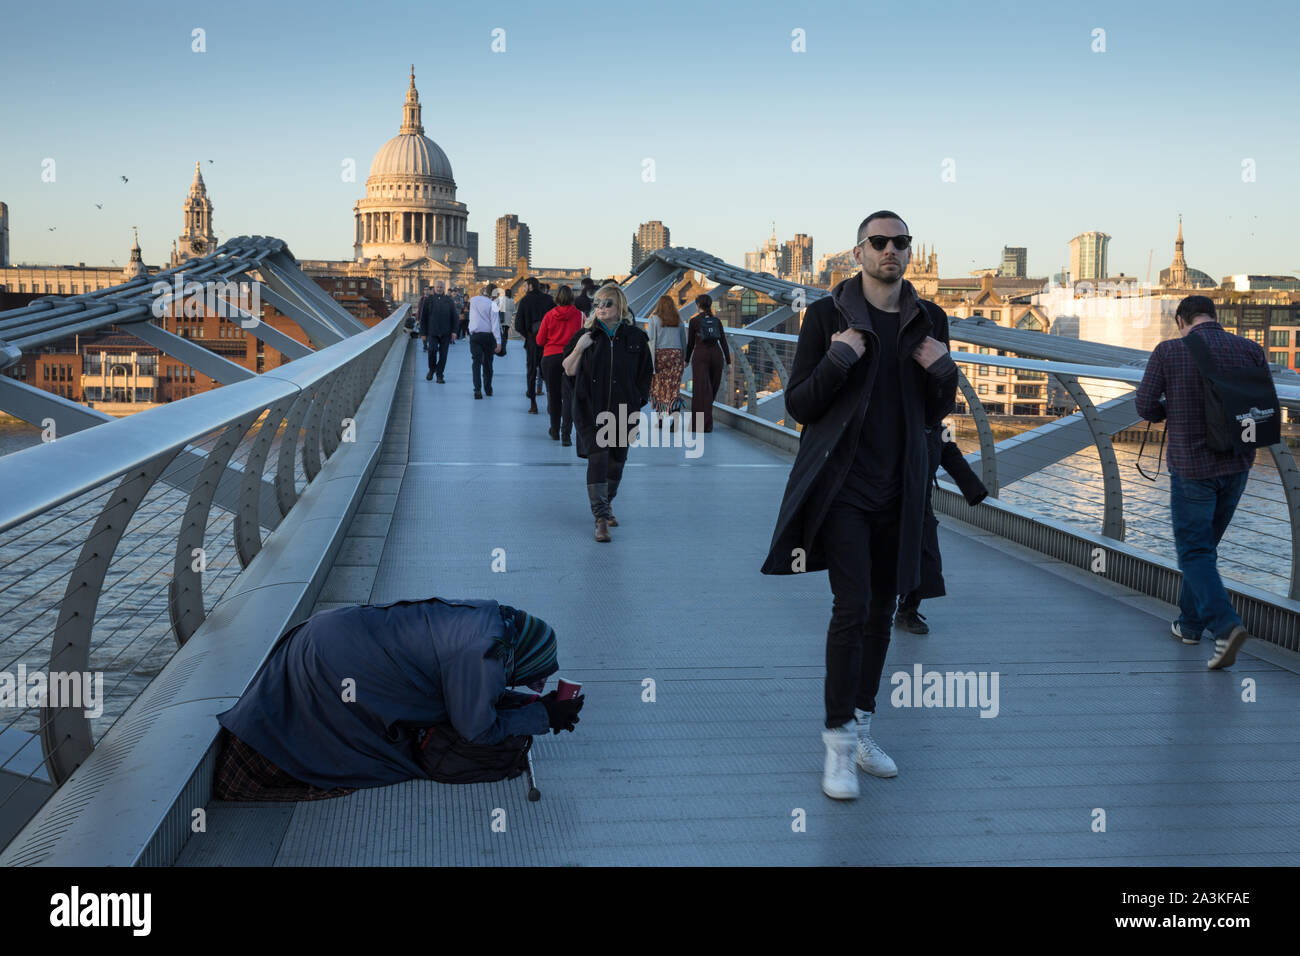 Pedestrians walking past a beggar on the Millenium Bridge with St Paul's Cathedral beyond, London, England, UK Stock Photo